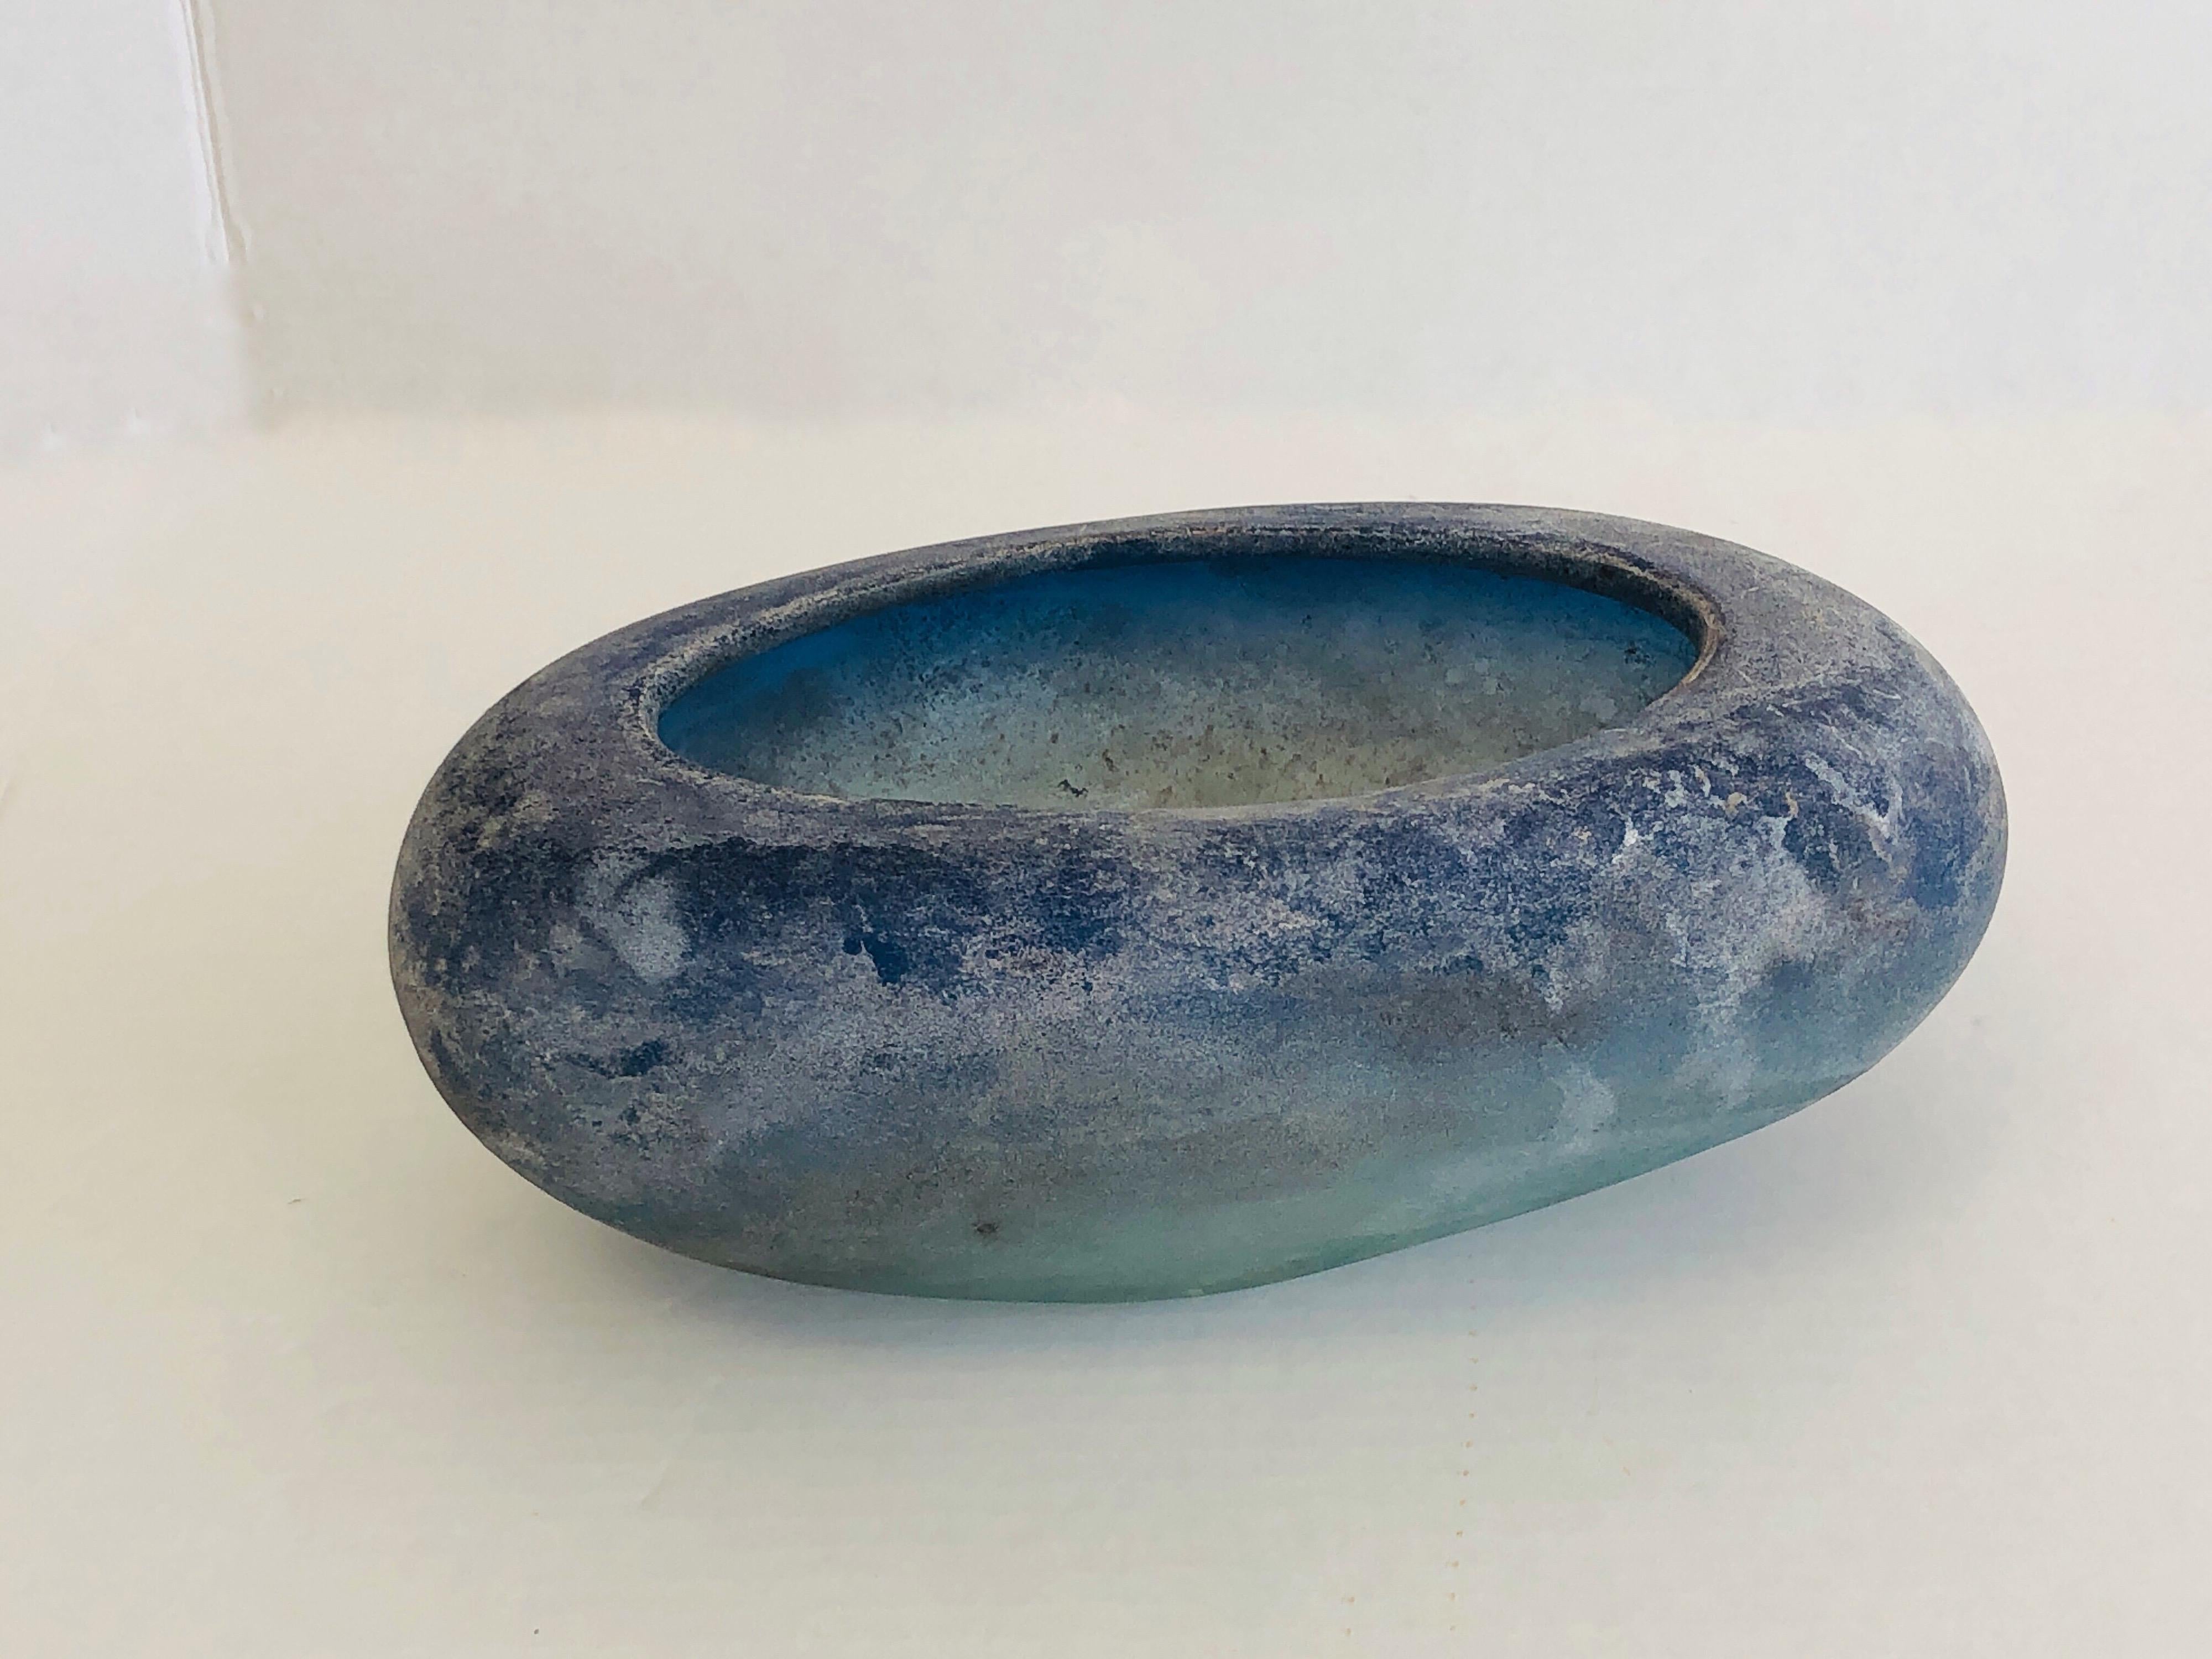 Biomorphic Cenedese bowl. Beautiful color and corroso surface.